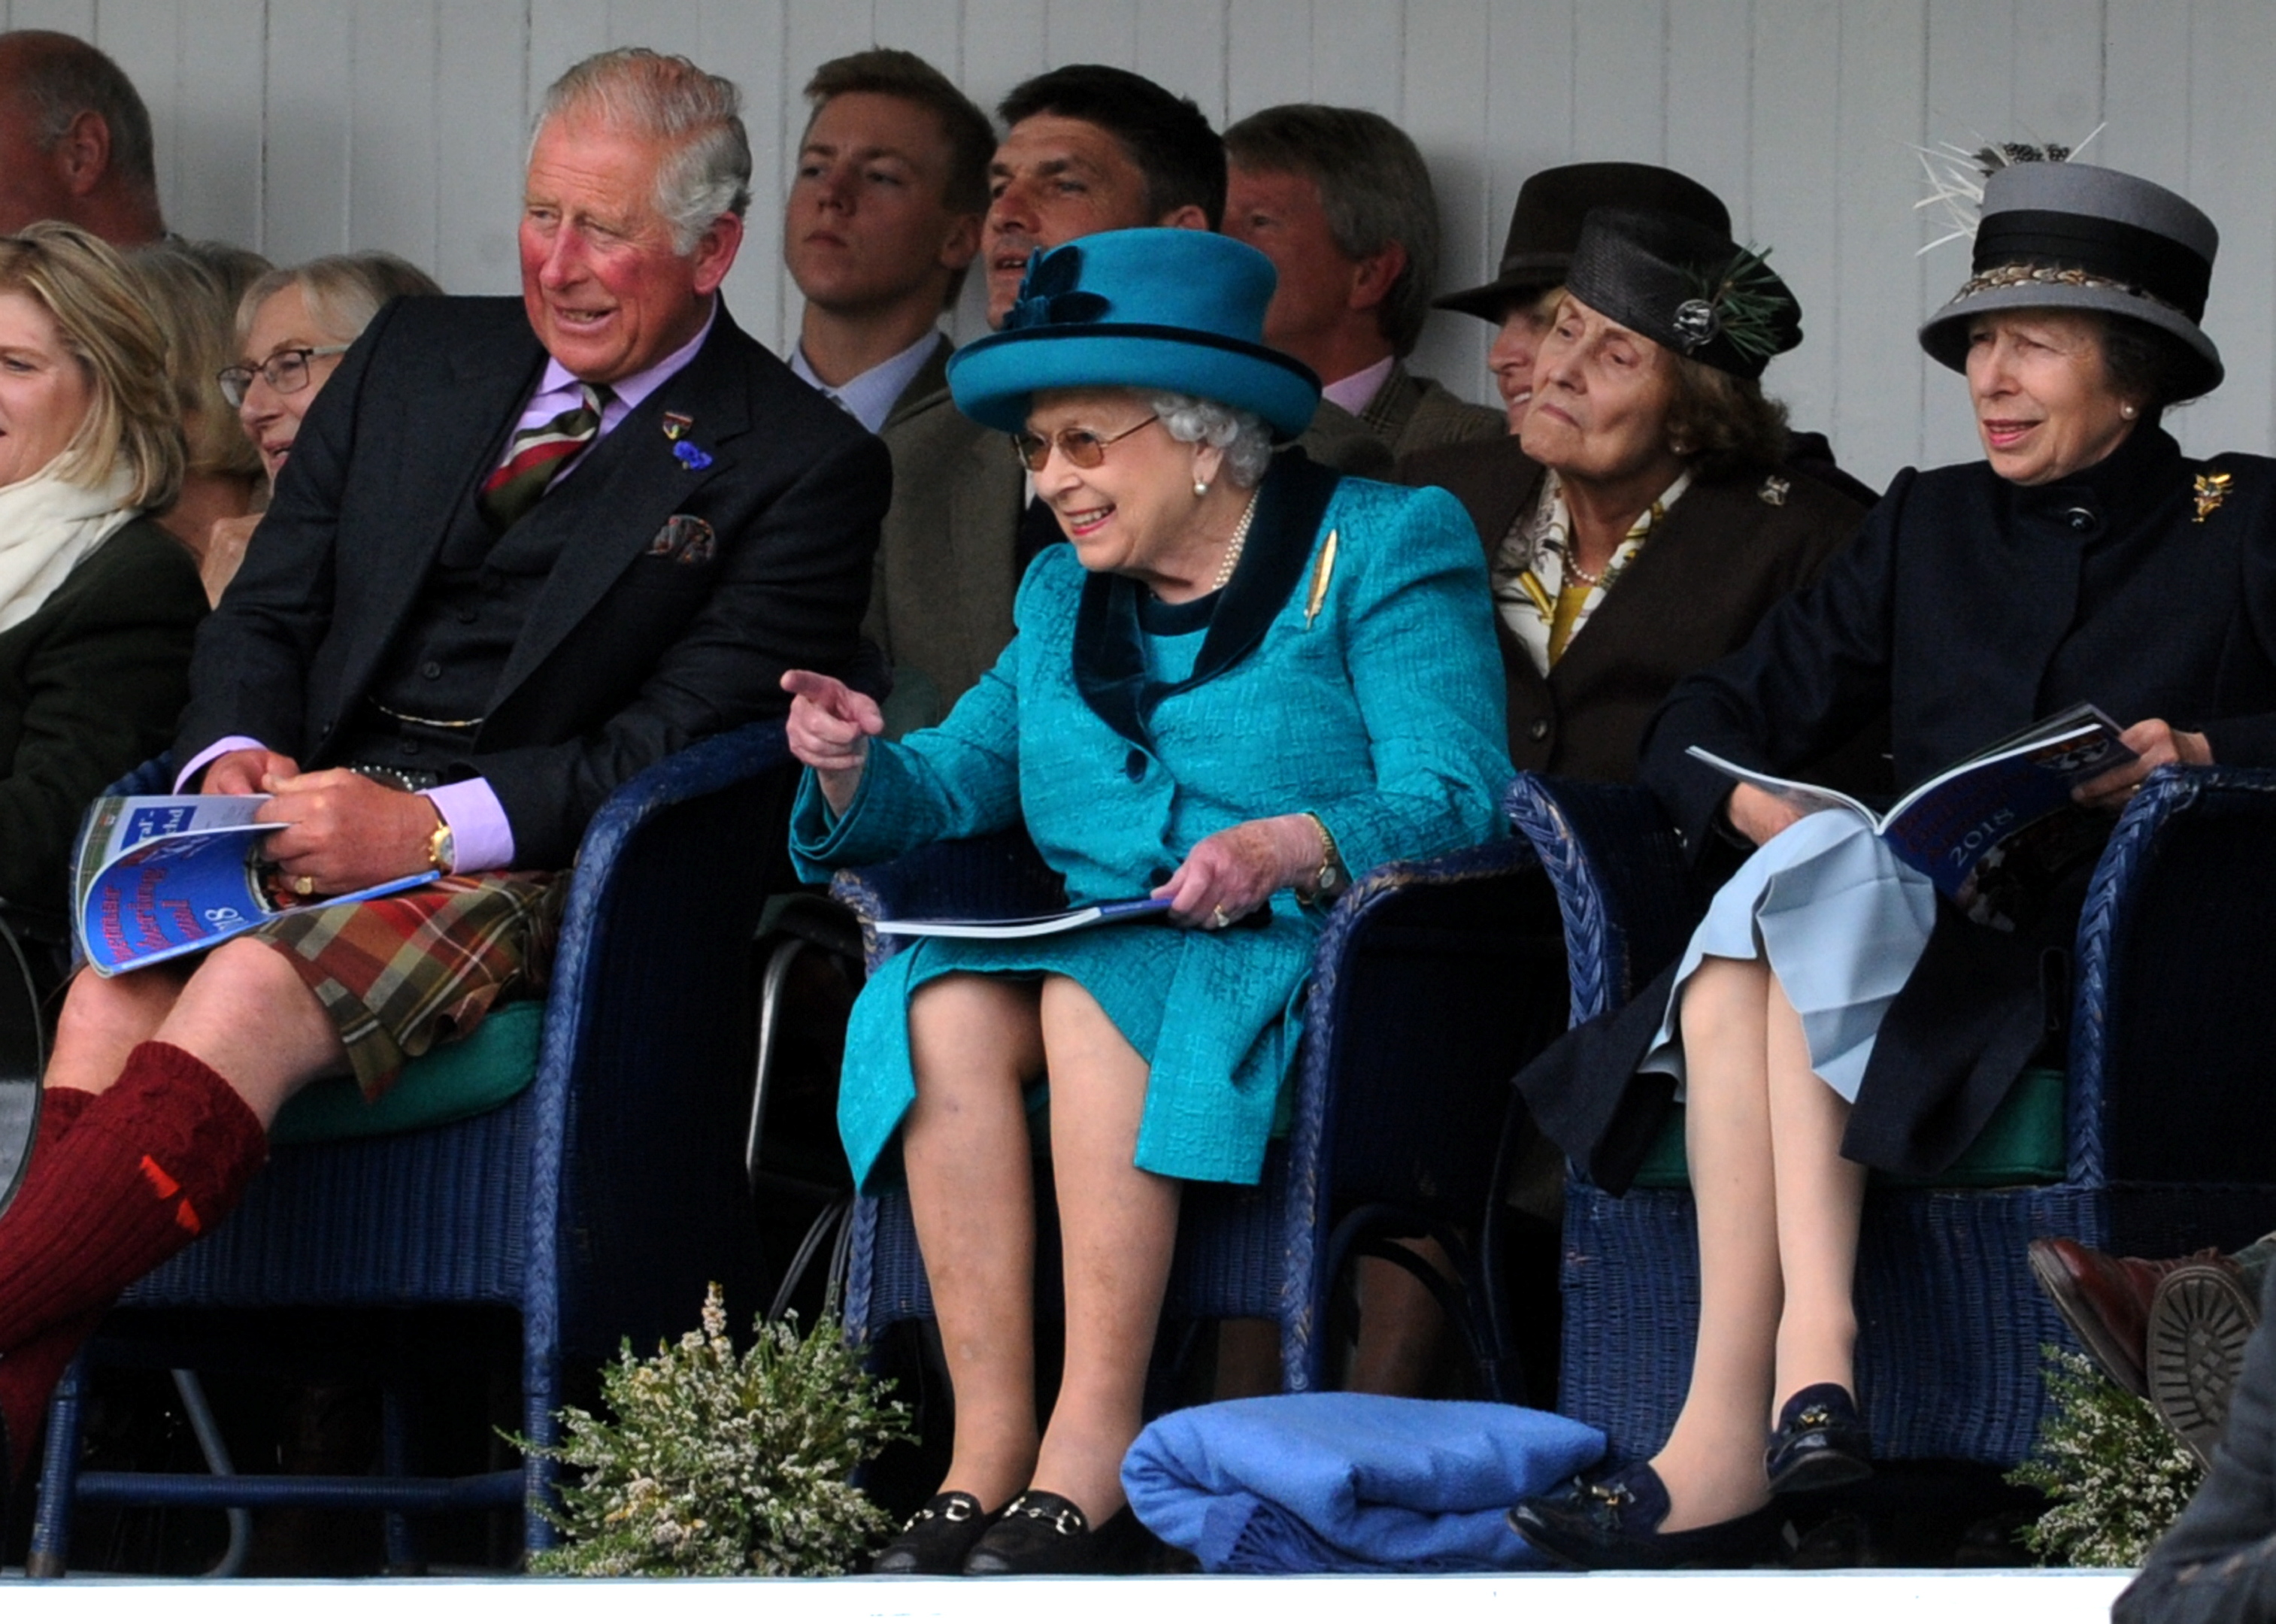 Braemar Gathering 2018, at The Princess Royal and Duke of Fife Memorial Park in Braemar.
Picture of Prince Charles, the Queen and Princess Anne watching the games.

Picture by KENNY ELRICK     01/09/2018